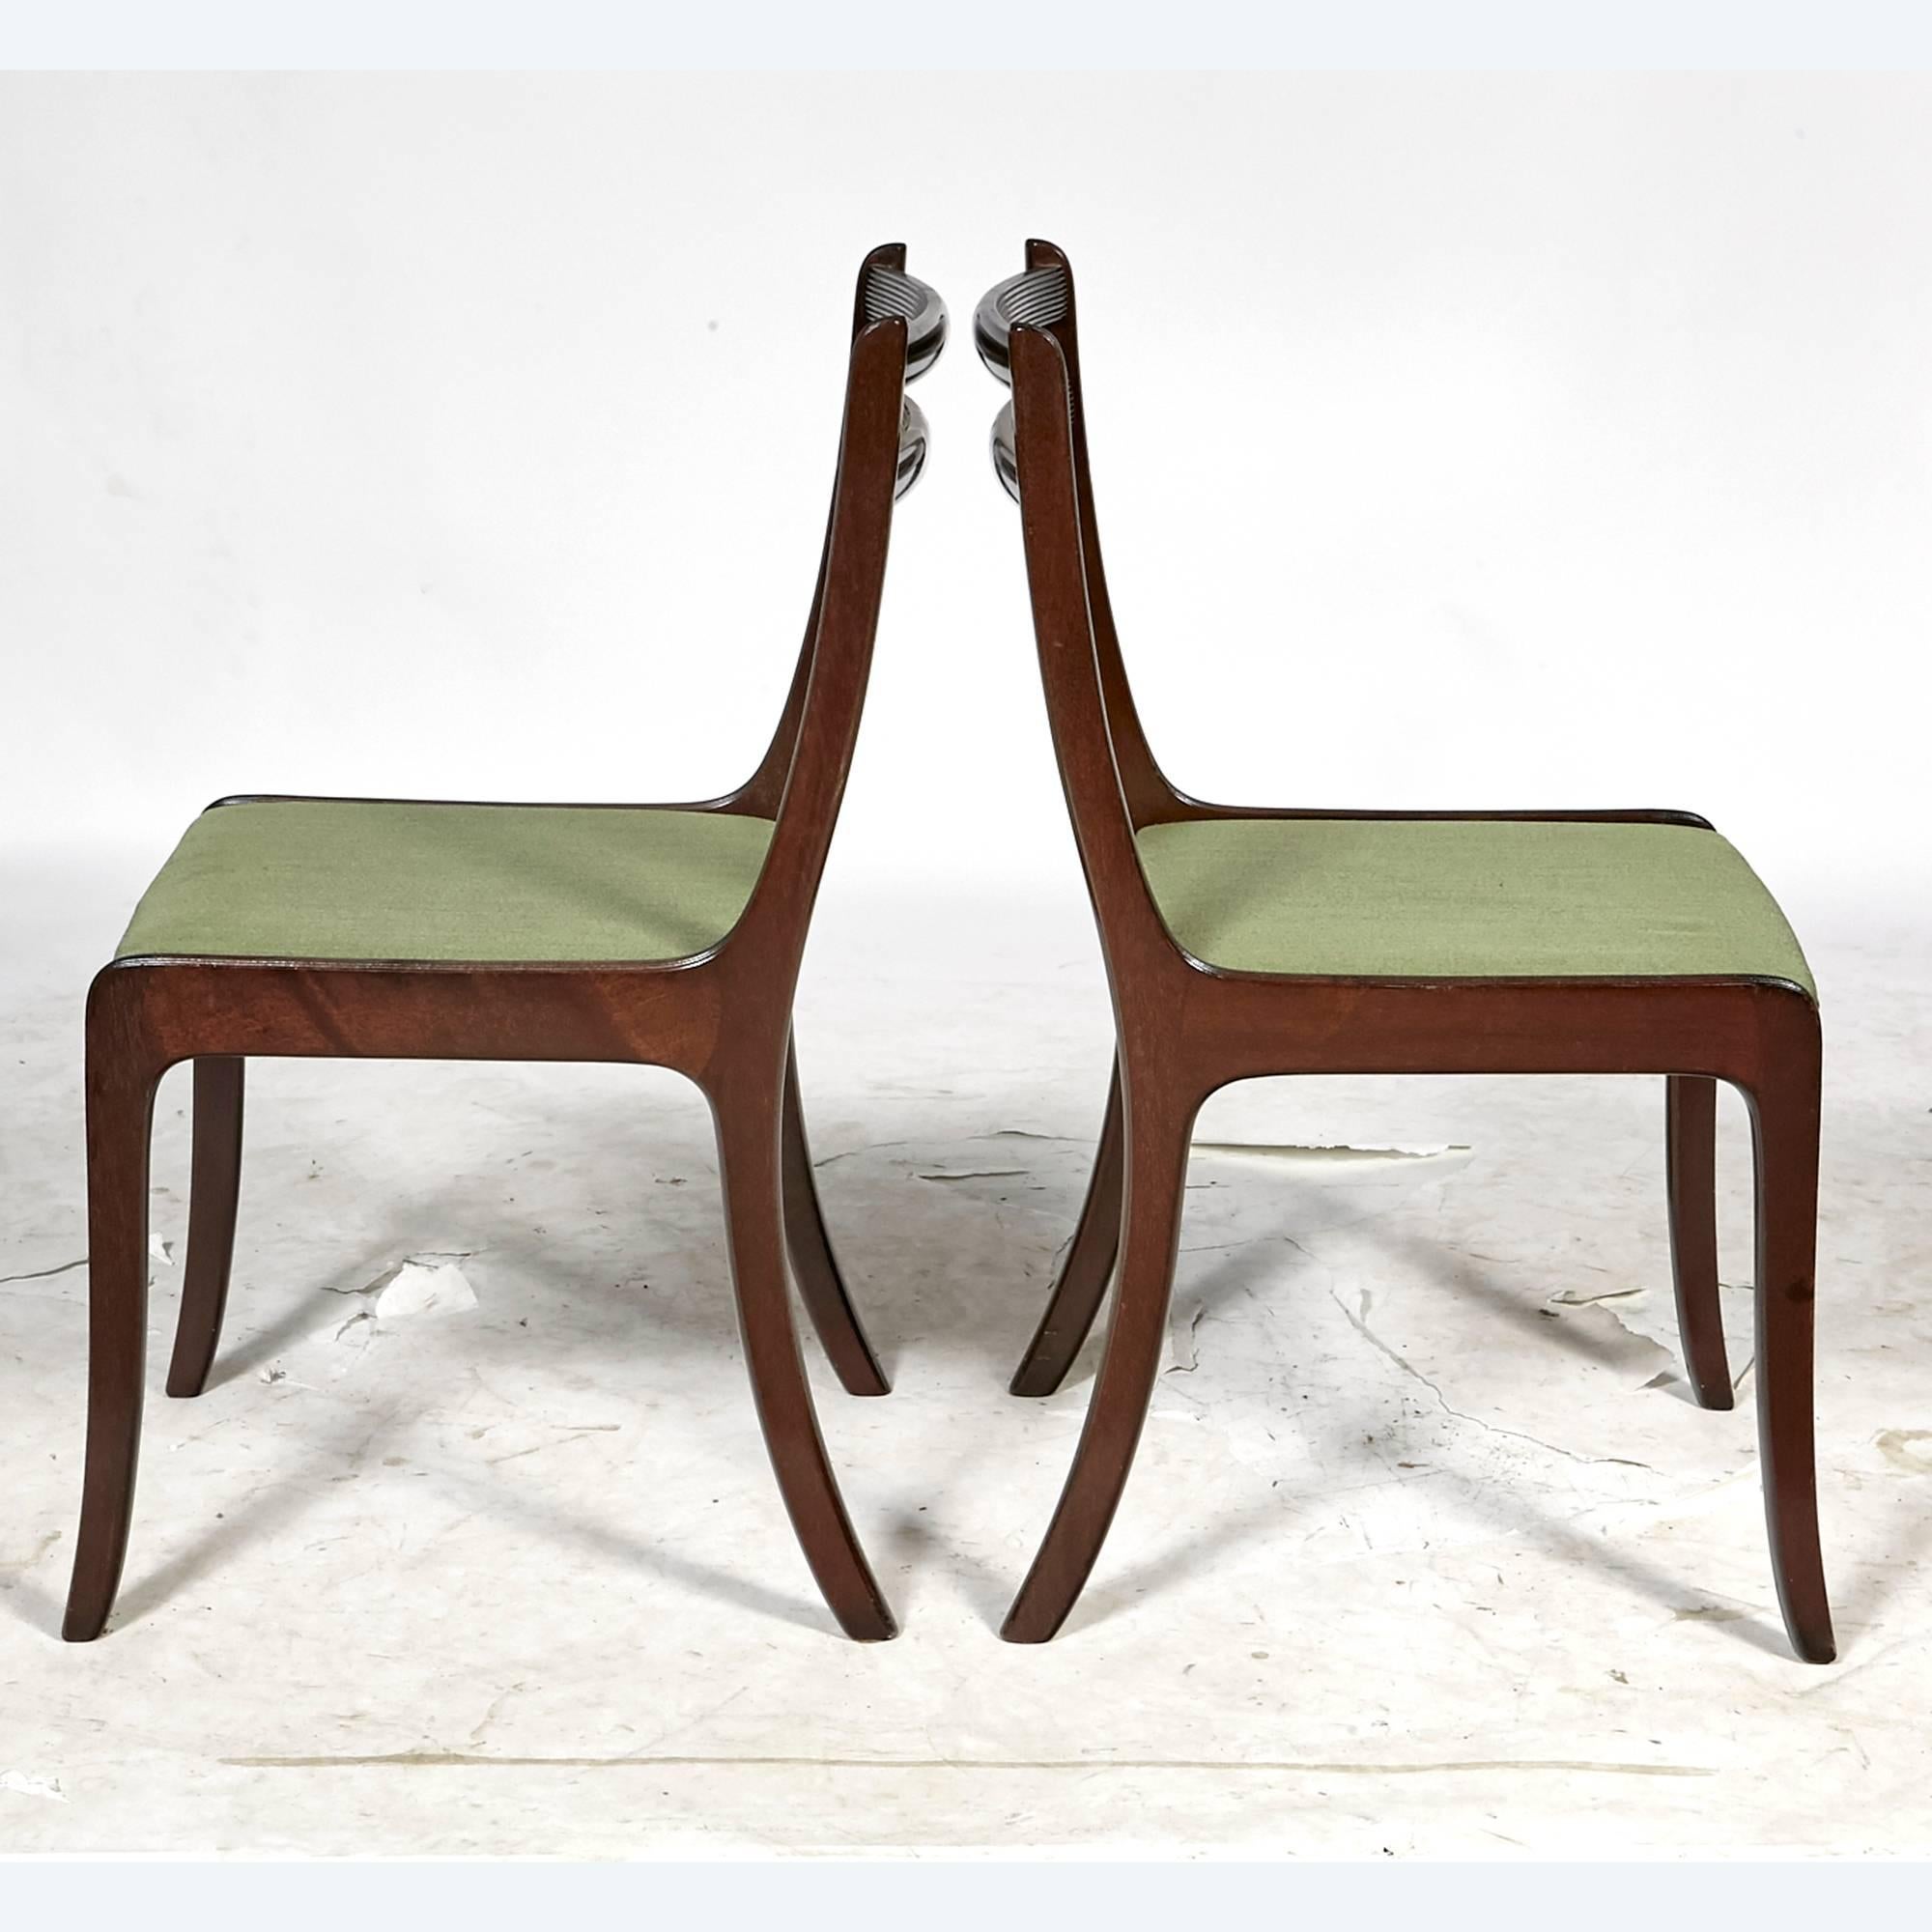 Scandinavian Modern Danish Mahogany Dining Chairs by Ole Wanscher for Poul Jeppesen, 1960s For Sale